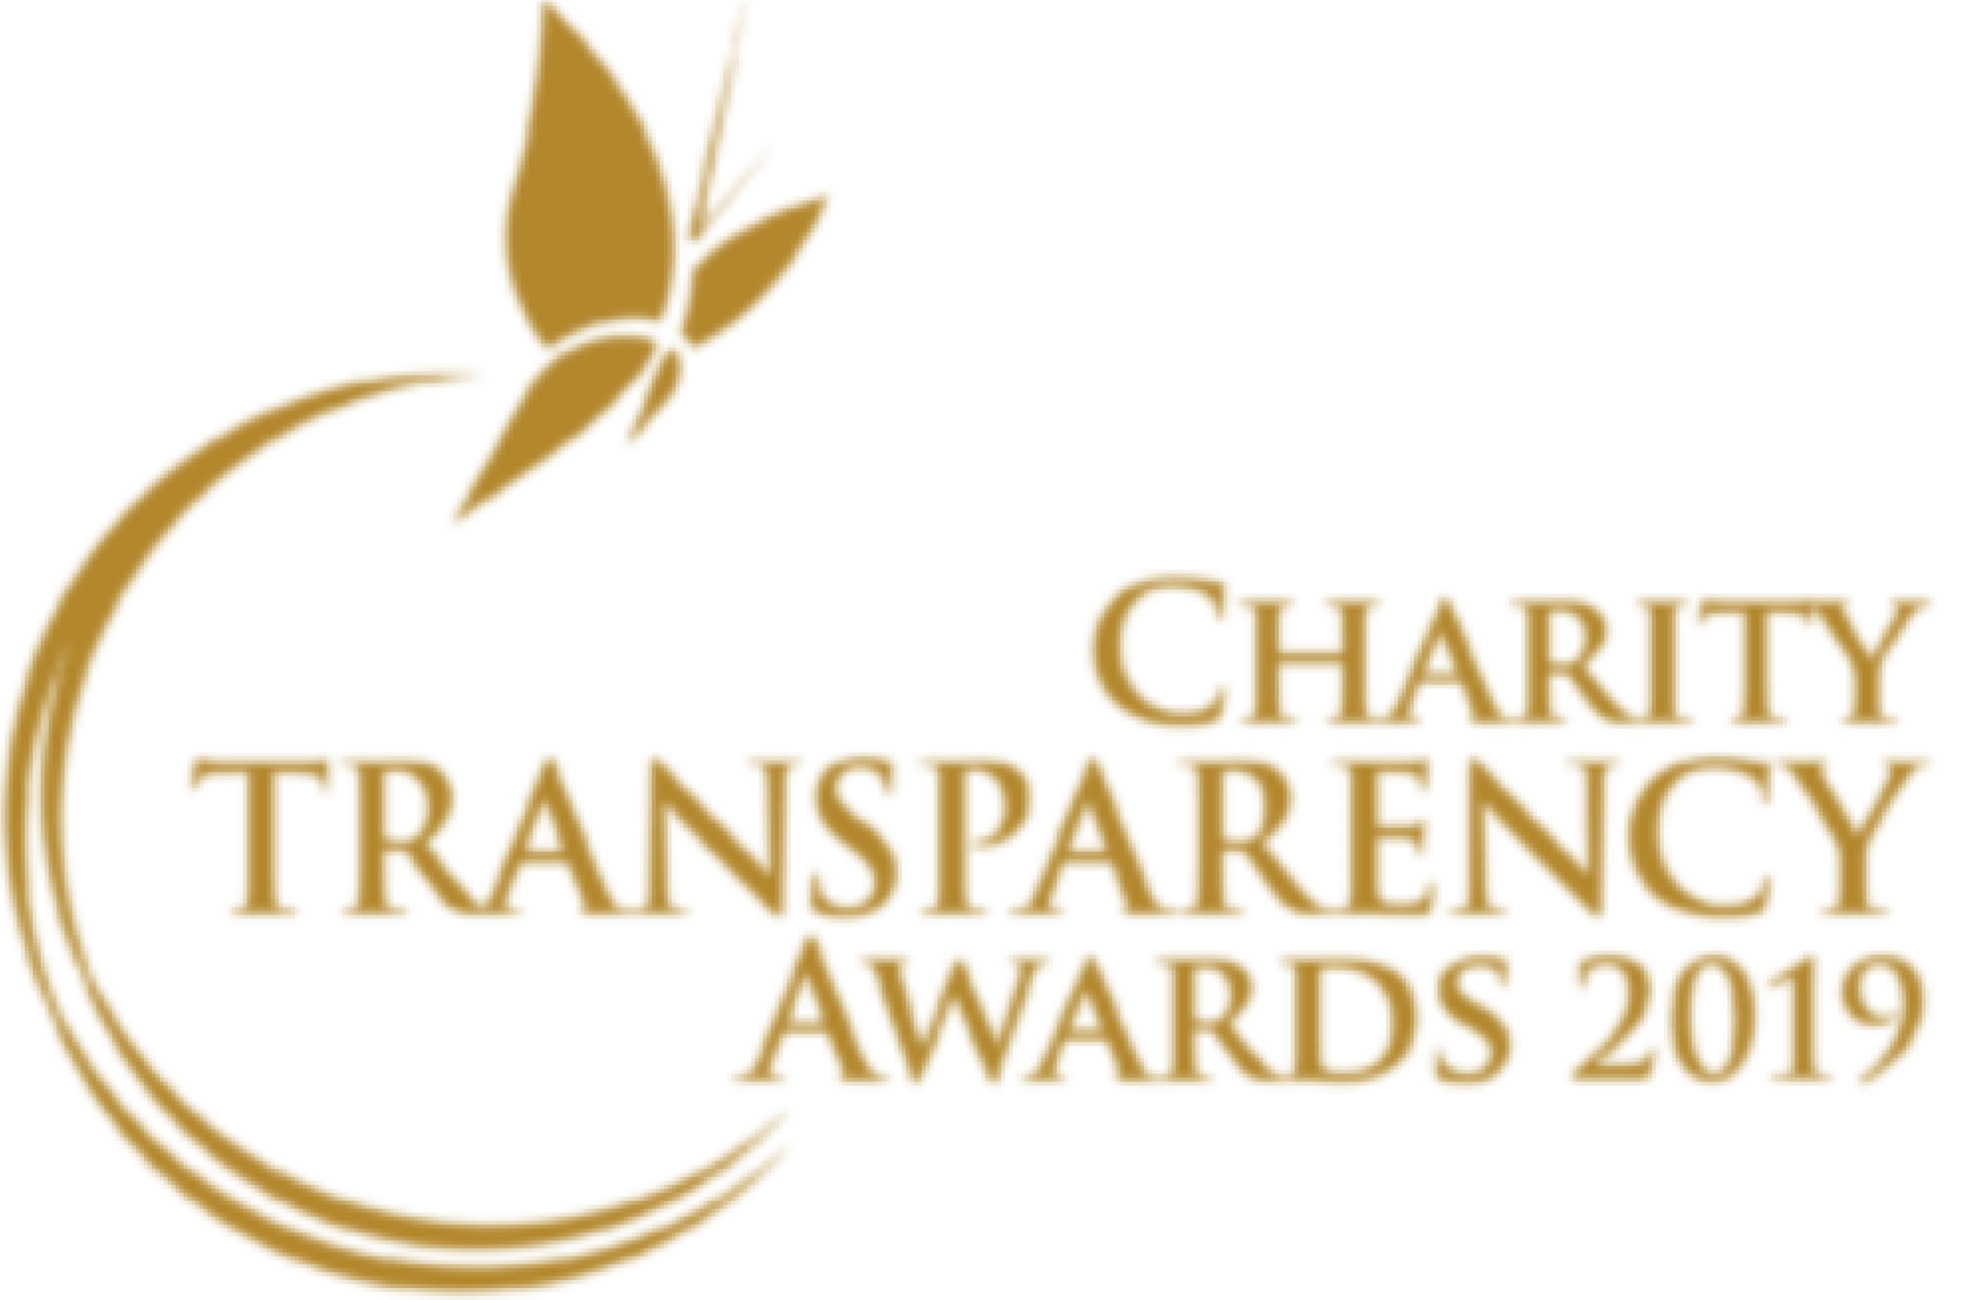 Charity Transparency Awards 2019